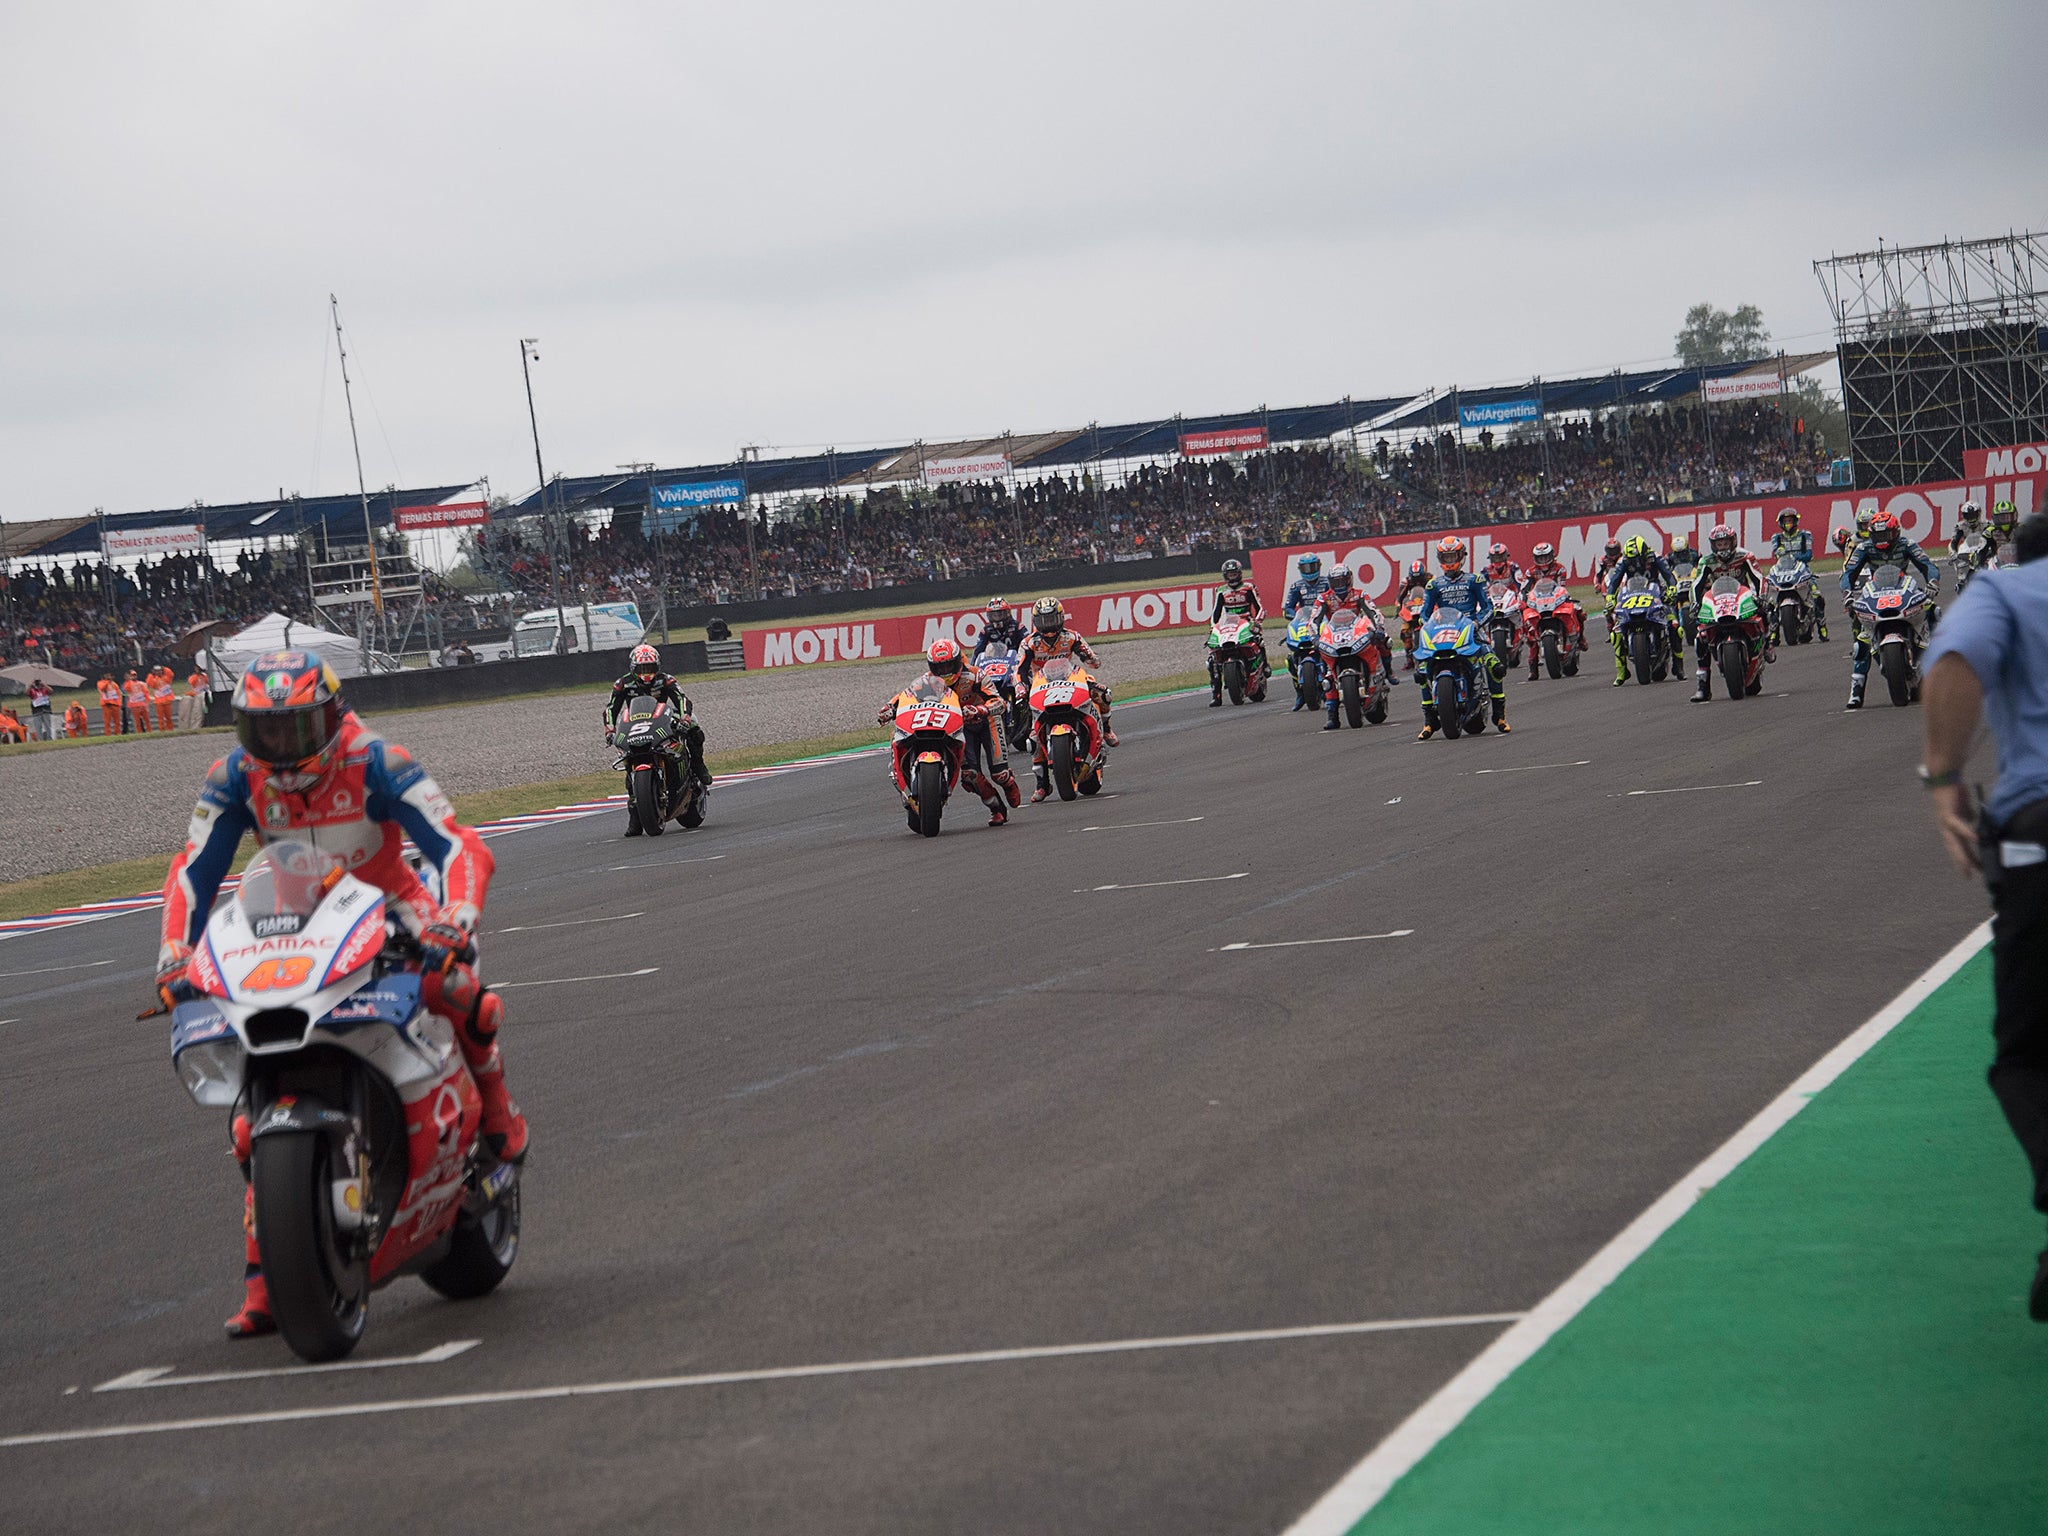 The race started in bizarre circumstances with all riders except Jack Miller serving a penalty